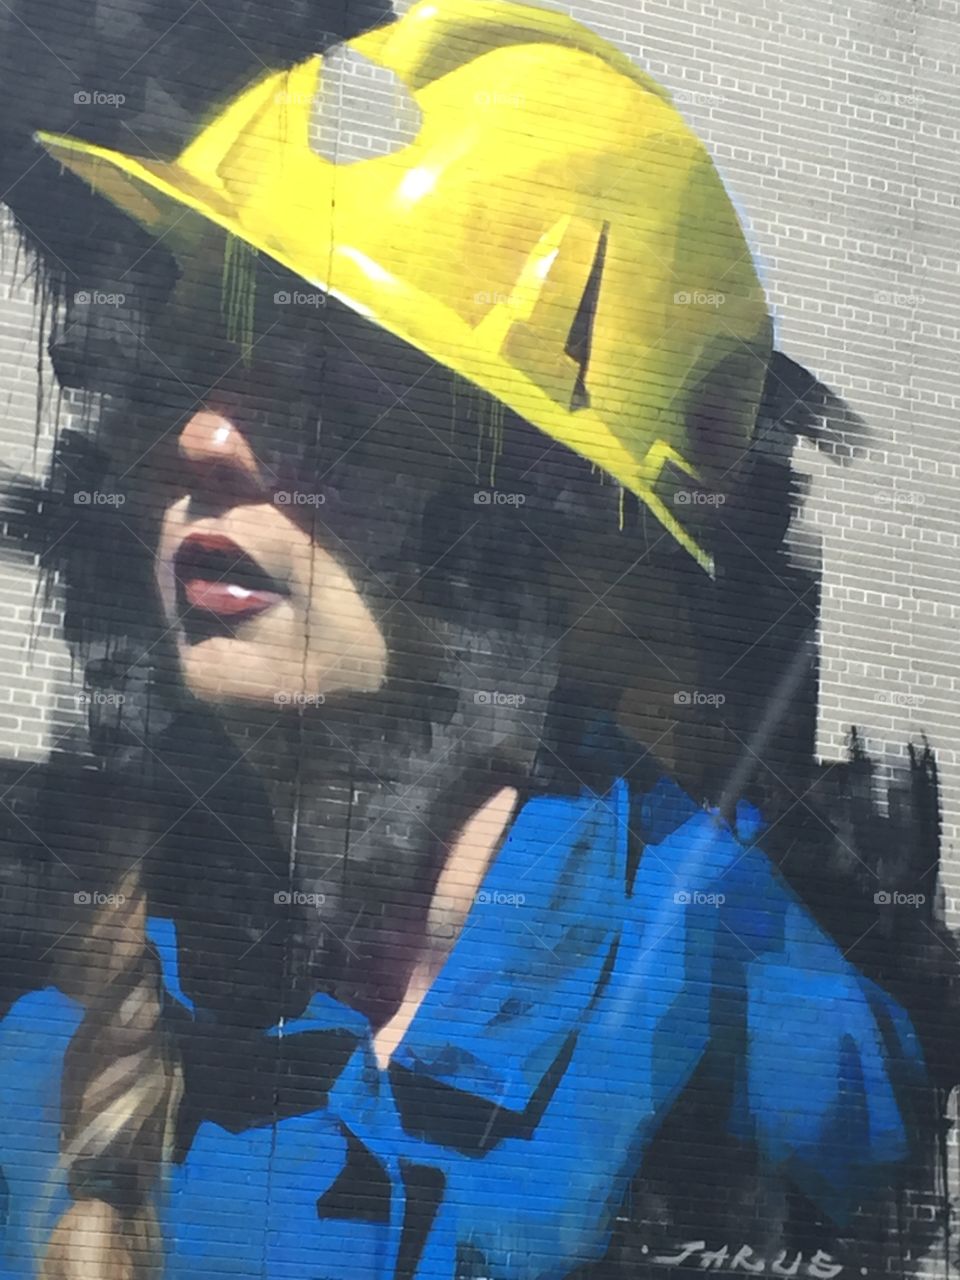 A peace of art on a building in Sudbury Ontario,Depicting women in hardhat and coveralls whether it be my mining or Construction this piece of art clearly shows women are not limited in careers